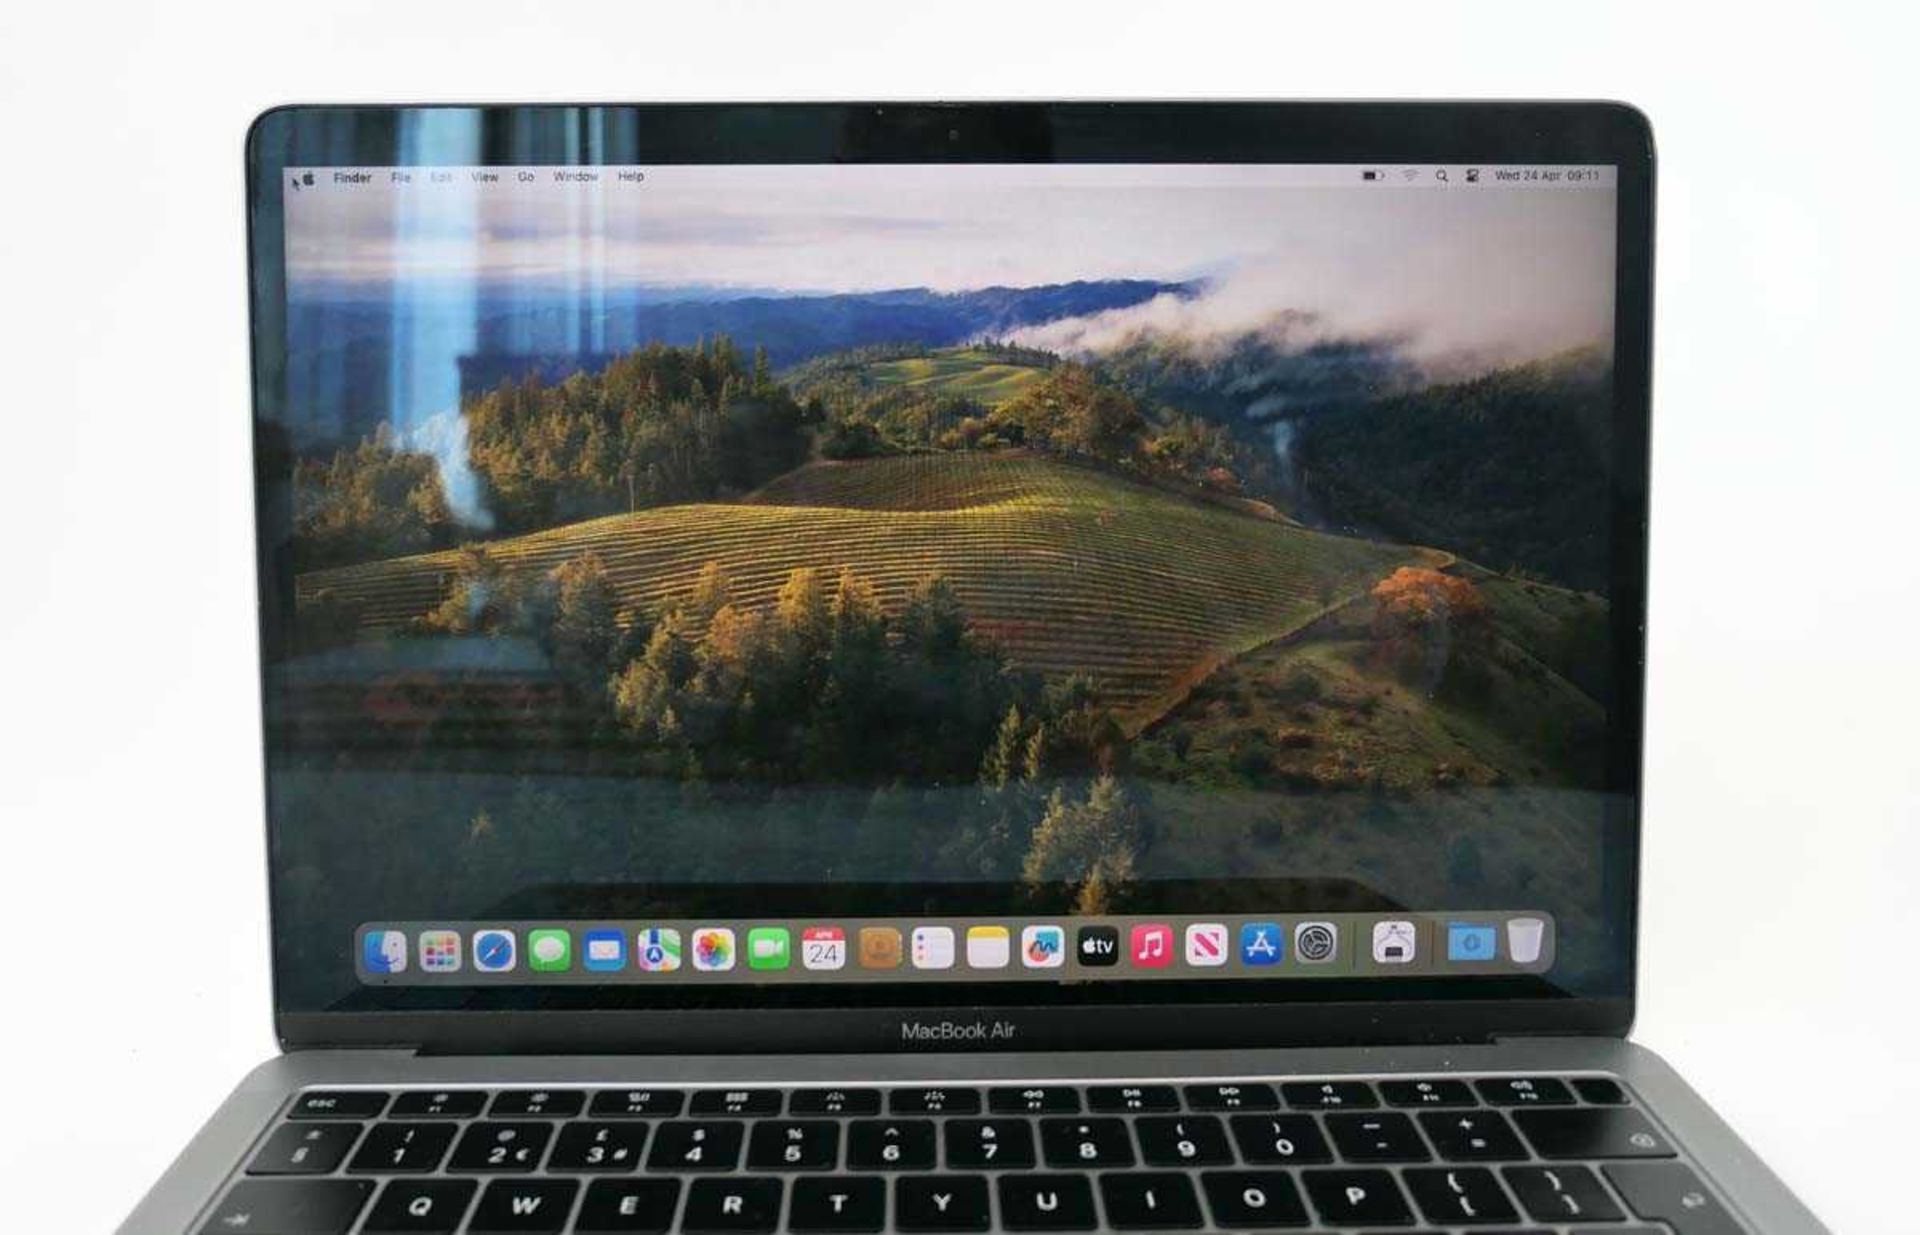 +VAT MacBook Air 13" 2019 A1932 Space Grey laptop with Intel i5 -1.6GHz, 8GB RAM and 512GB SSD - Image 2 of 3